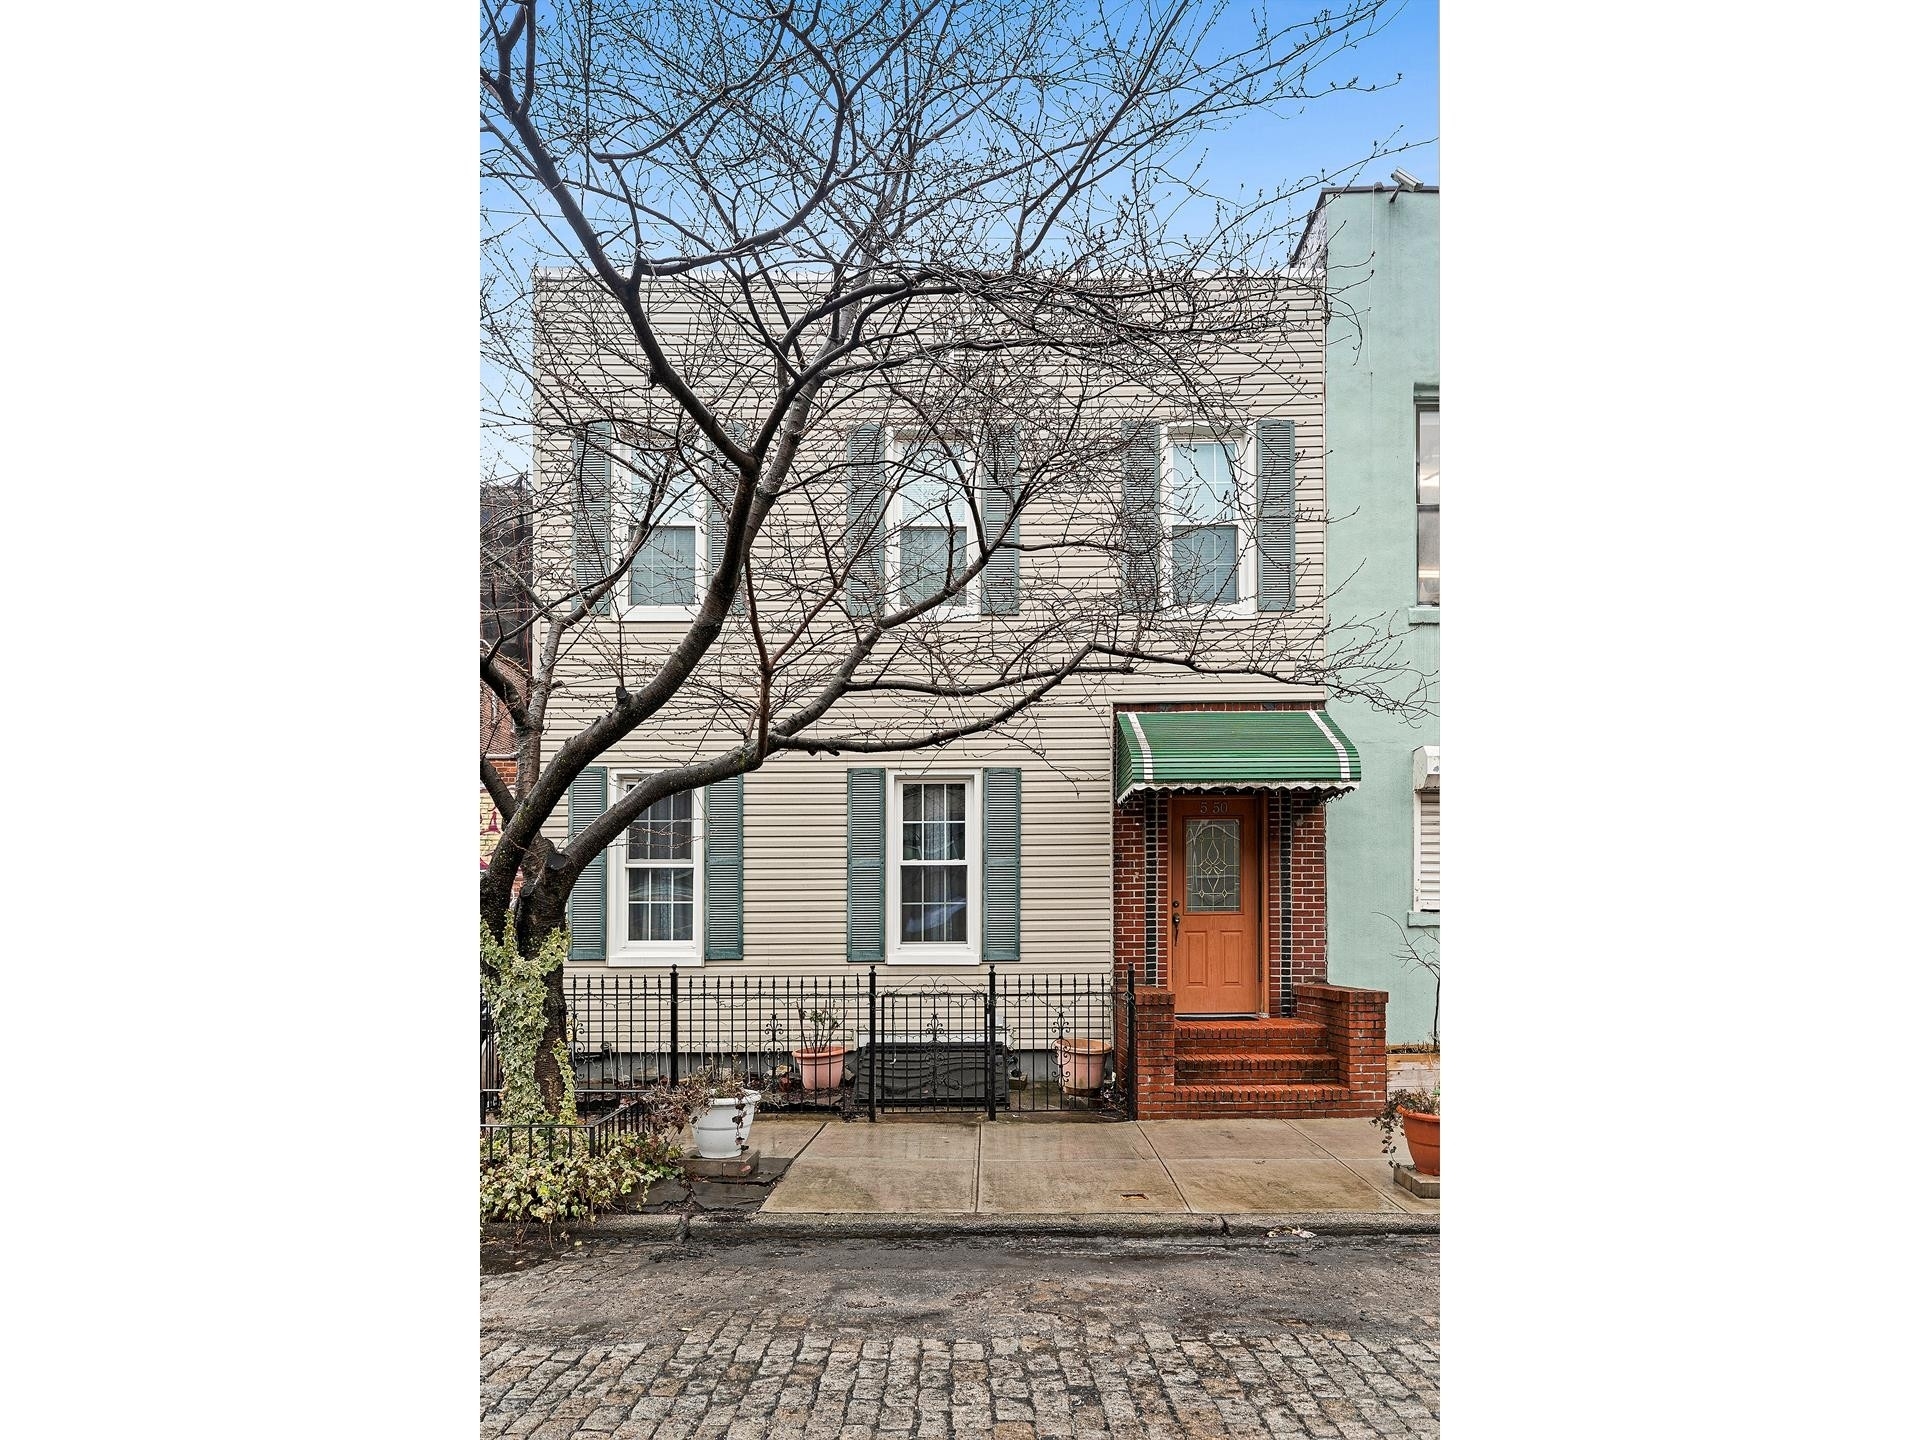 5-50 46TH RD, TOWNHOUSE Queens, NY 11101